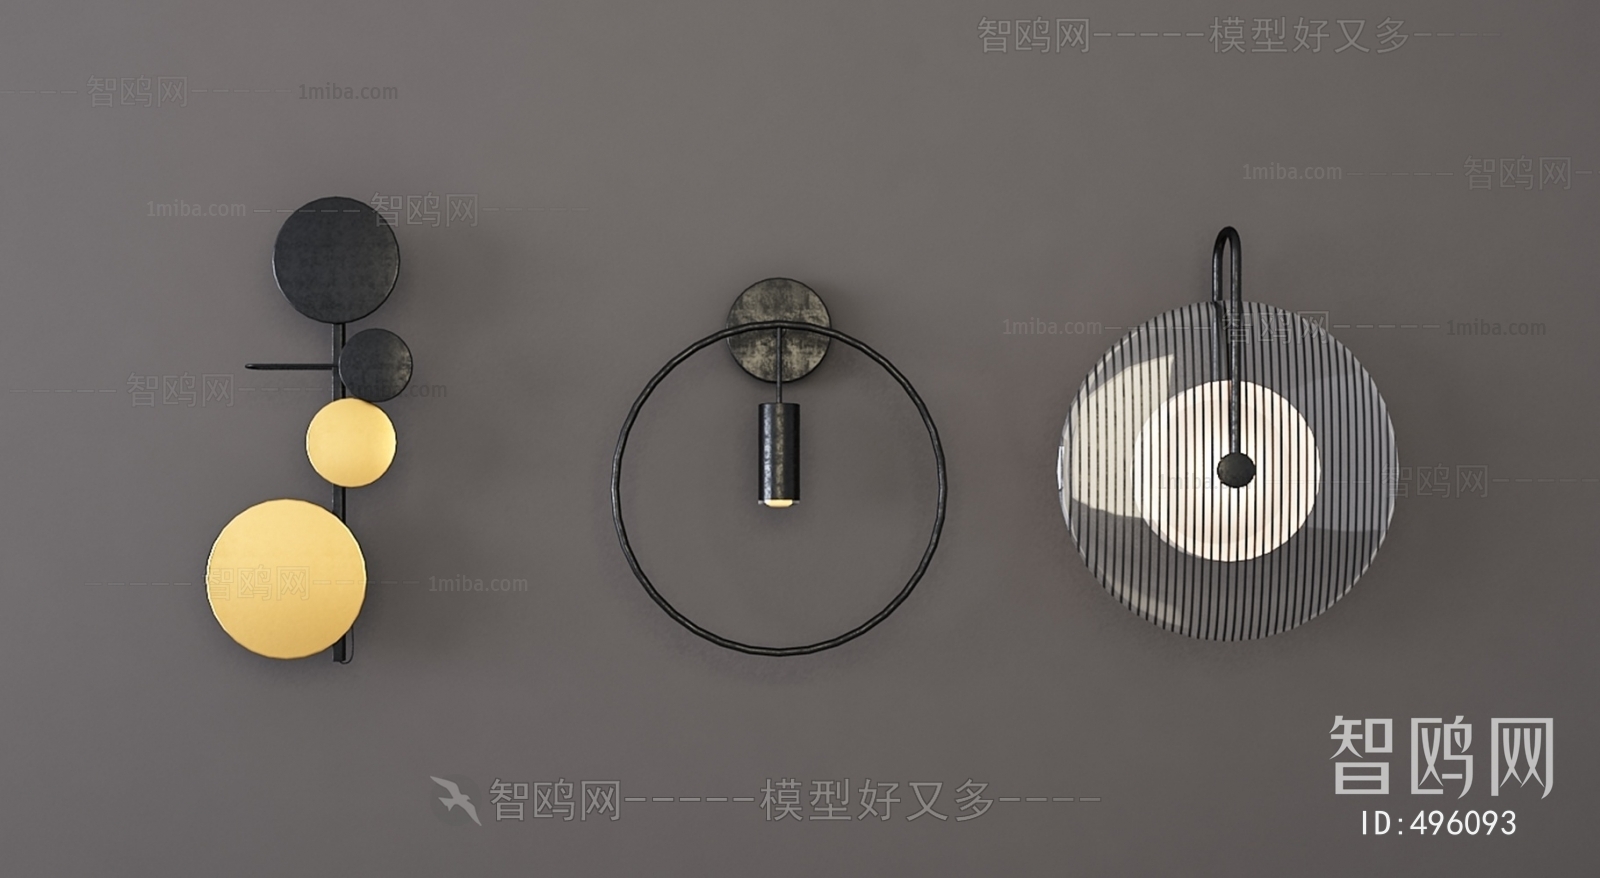 New Chinese Style Wall Lamp